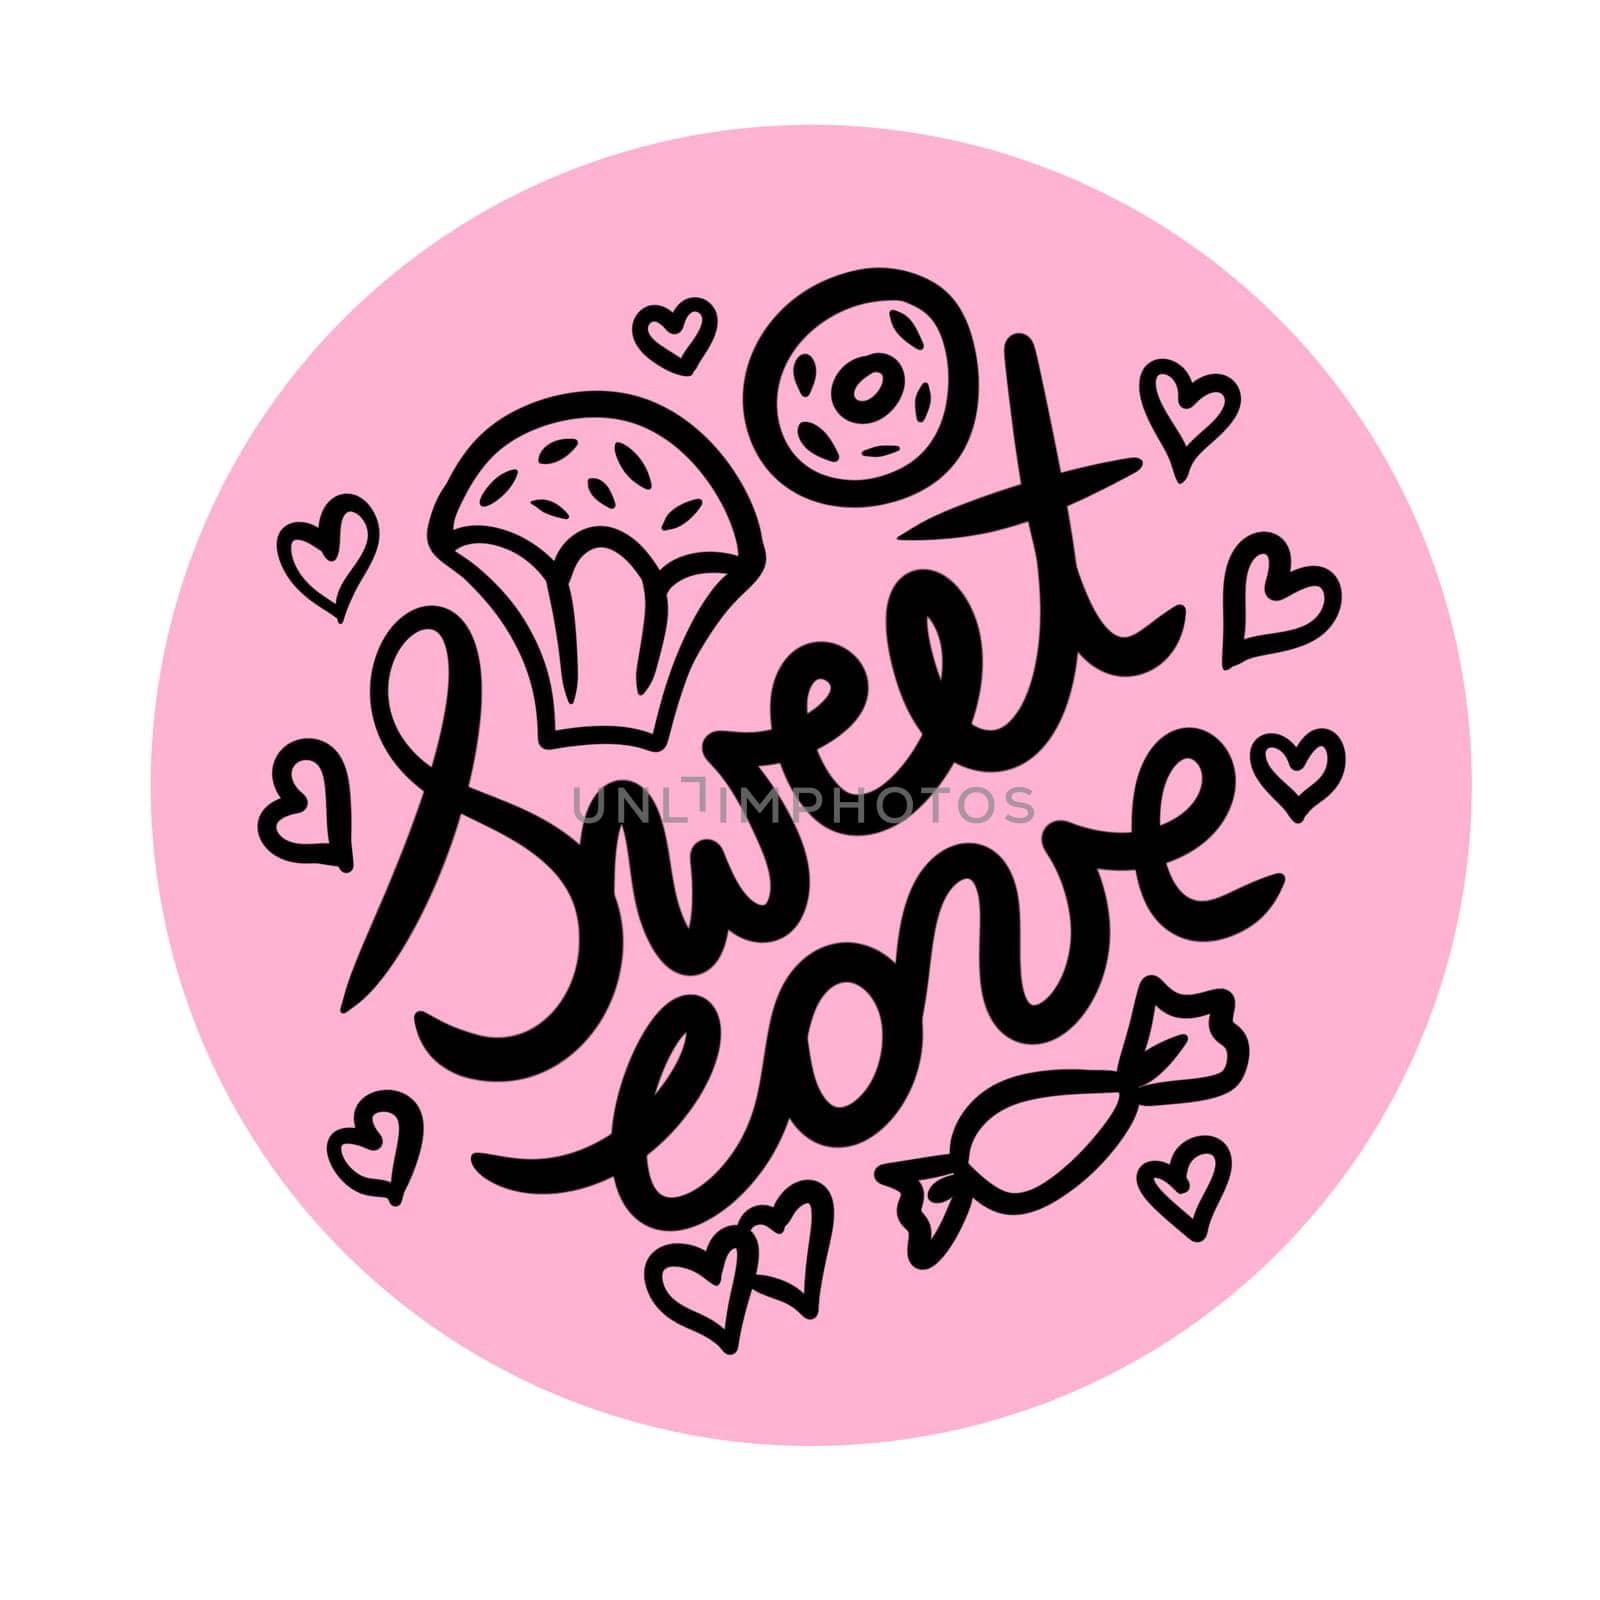 Hand drawn illustration of Valentine day greeting, desserts, sweet tasty candy cupcake. Cute trendy lollipop design, pink baking bakery pastel party food, sugar recipe cooking